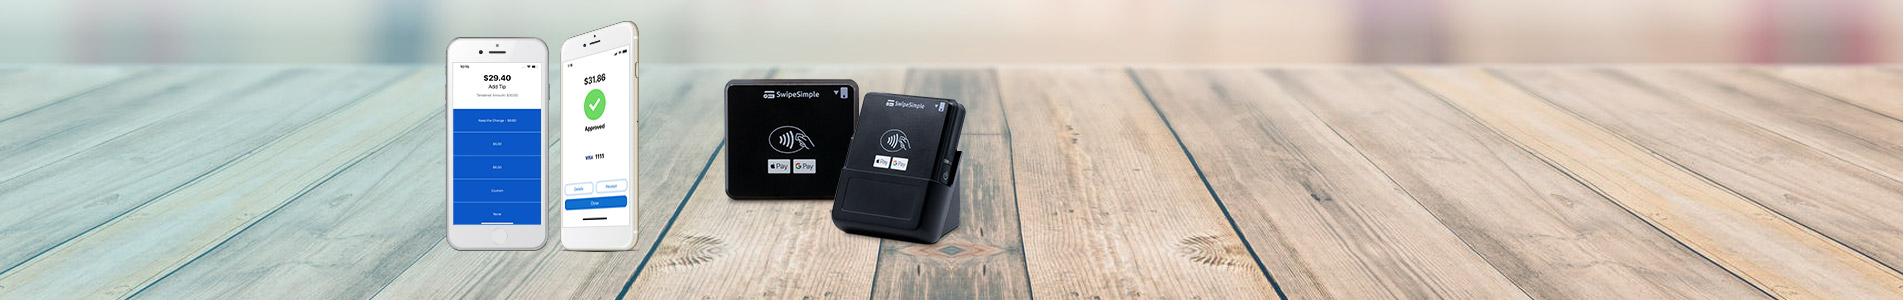 SwipeSimple Mobile App, and card reader